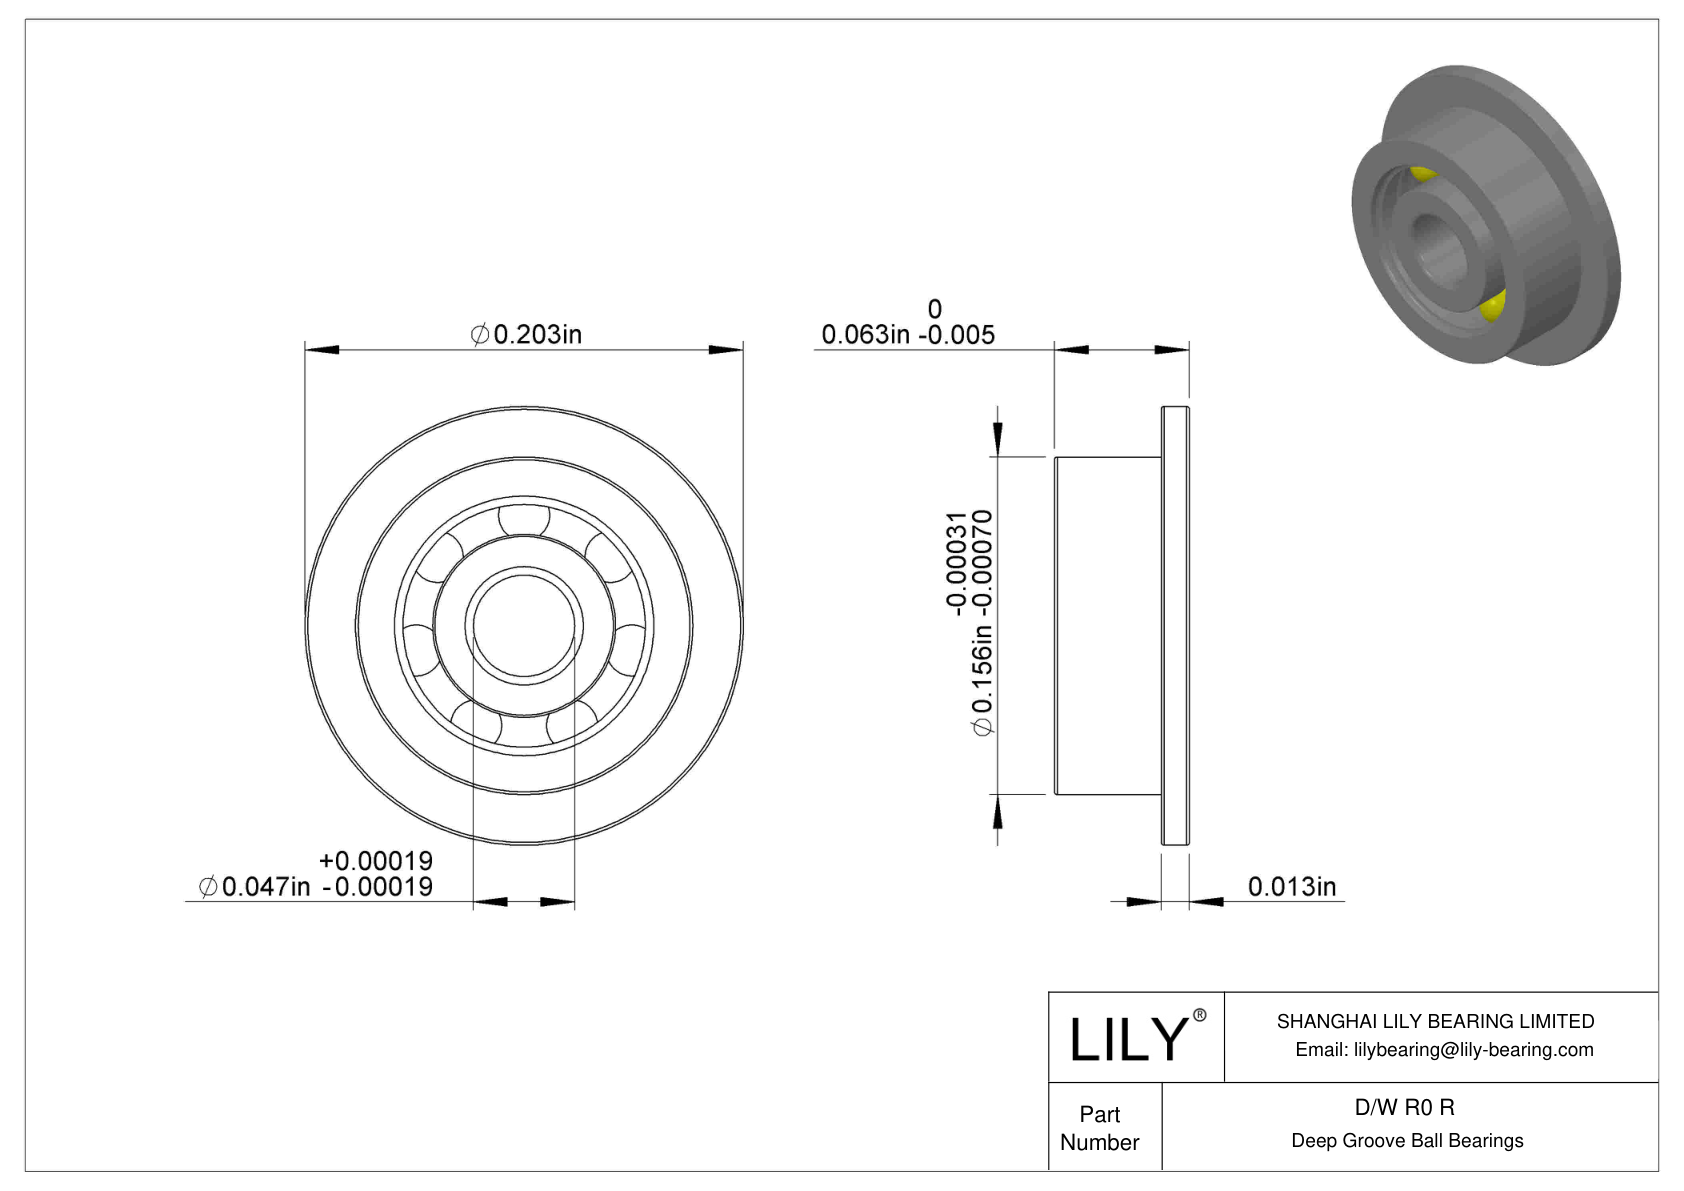 D/W R0 R Flanged Ball Bearings cad drawing